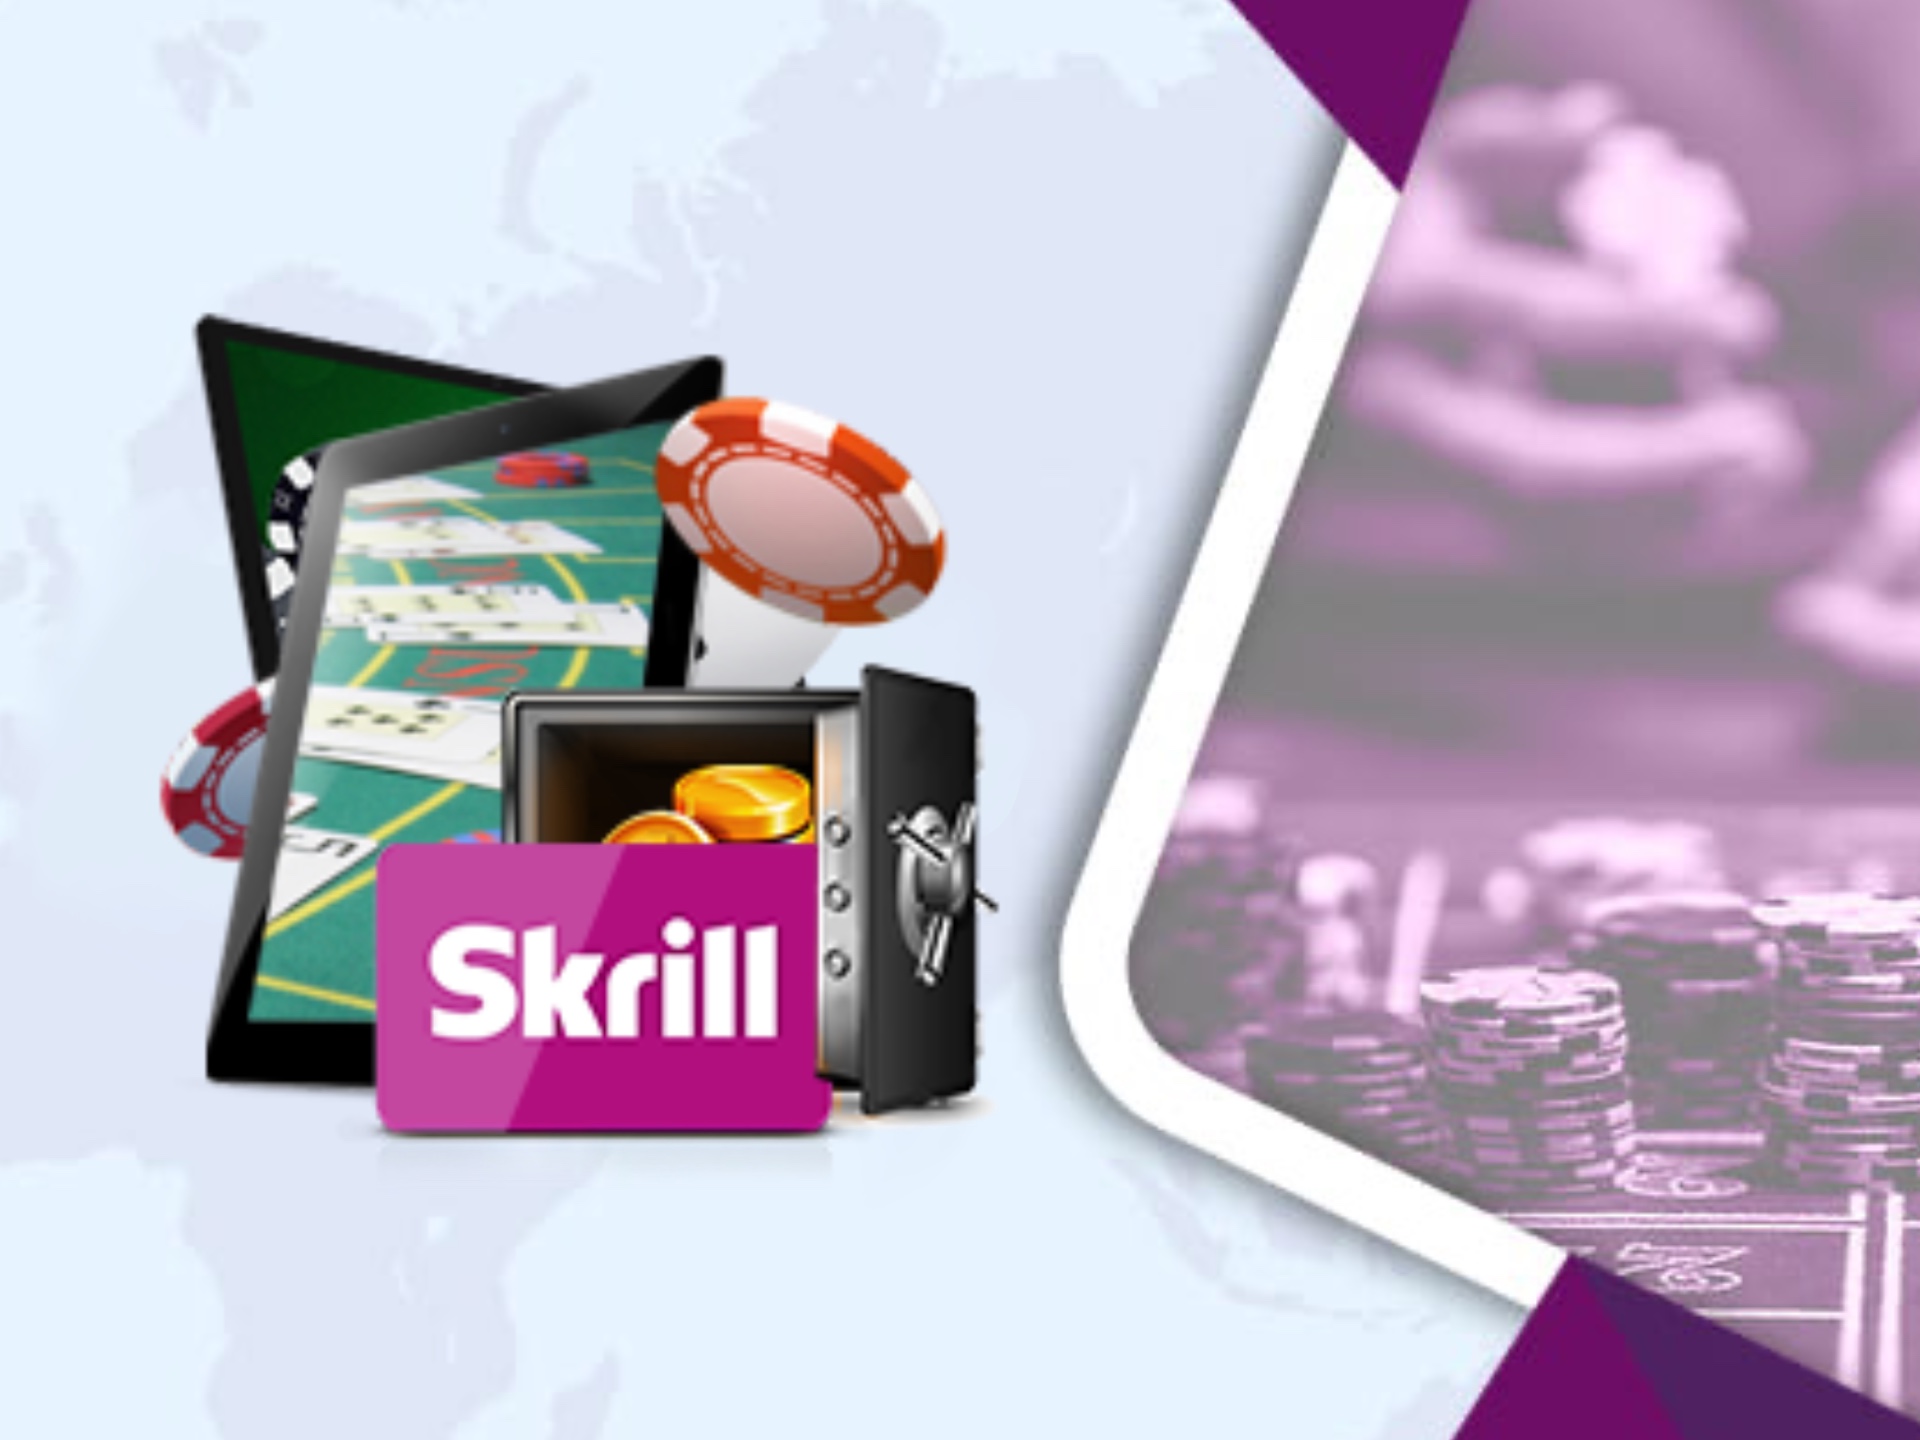 Skrill is very popular online casino payment method among Indian players.